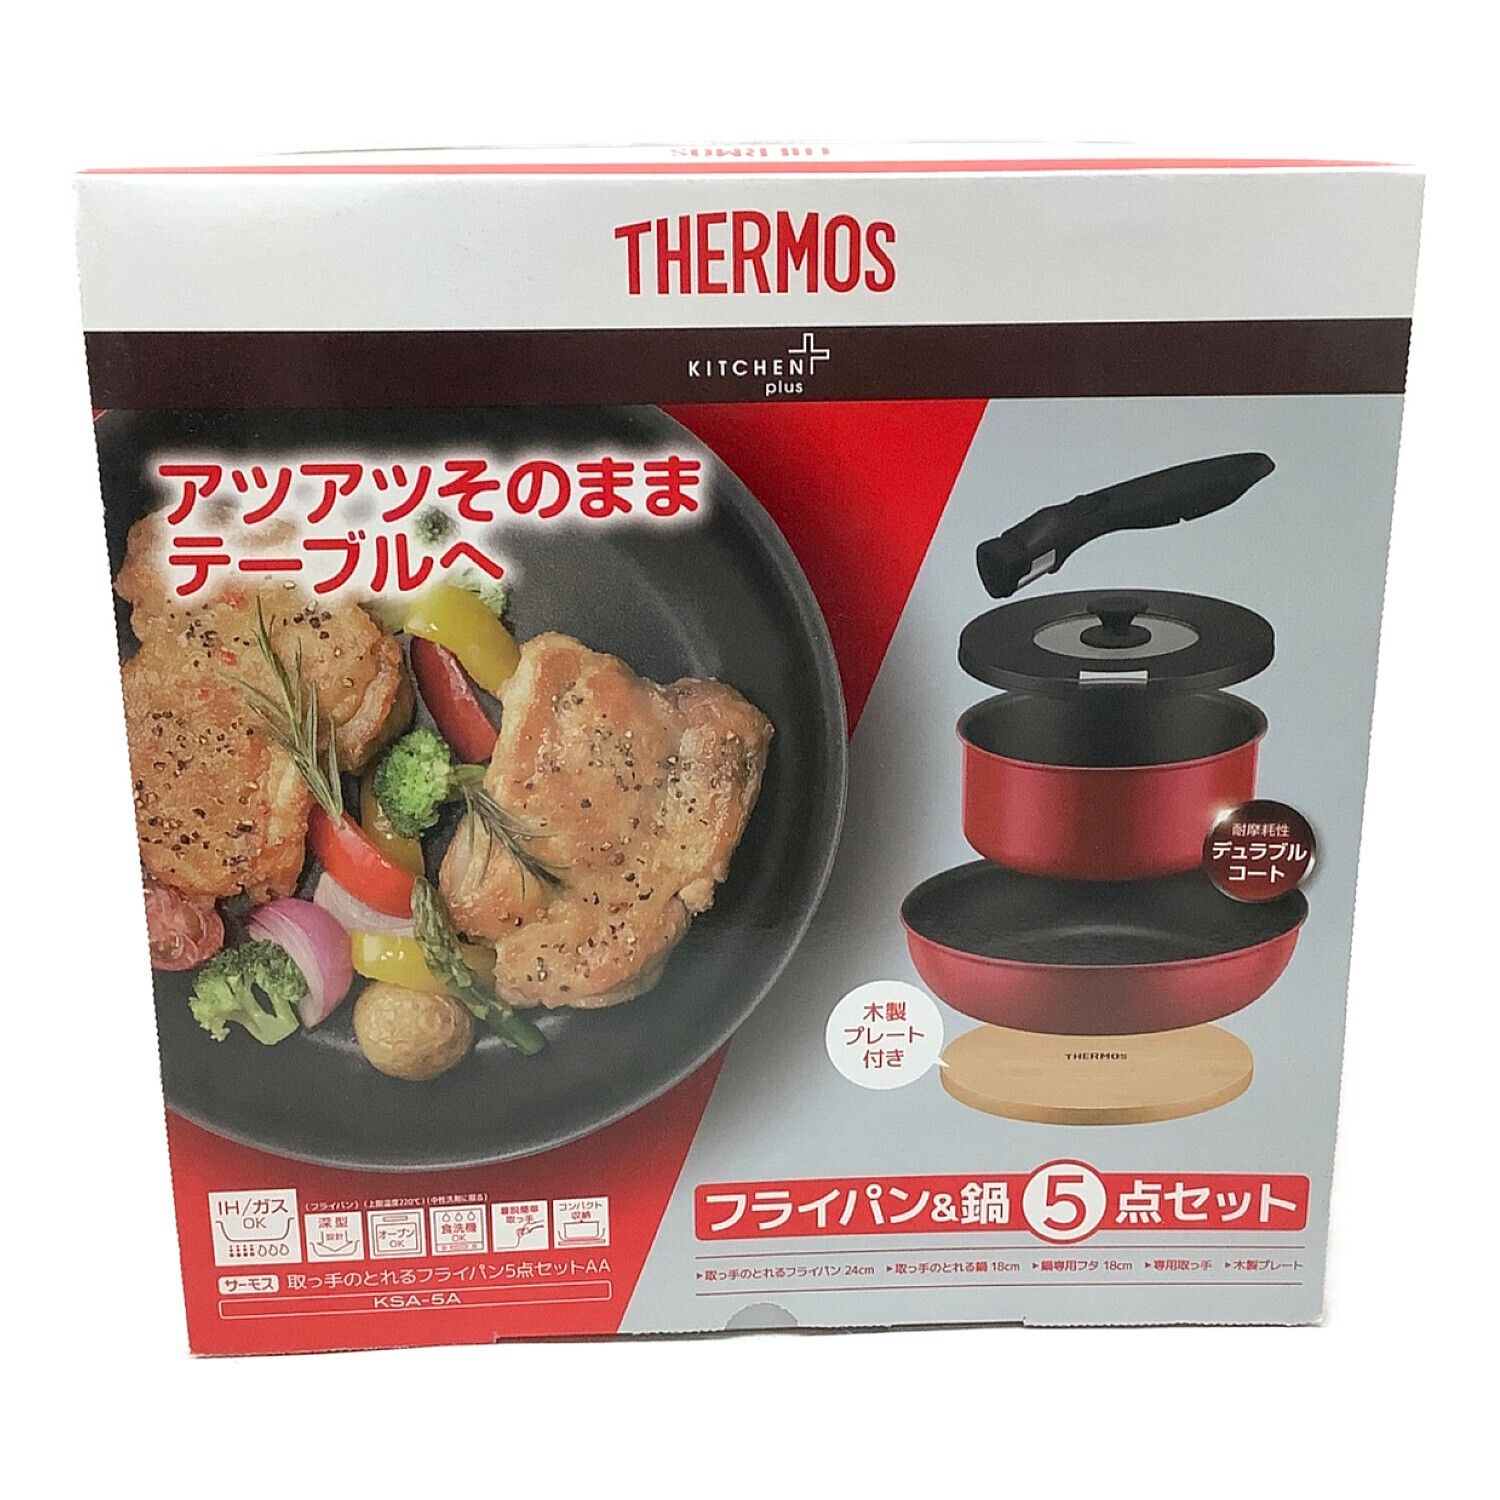 THERMOS  サーモス  フライパン&鍋5点セット  新品未使用